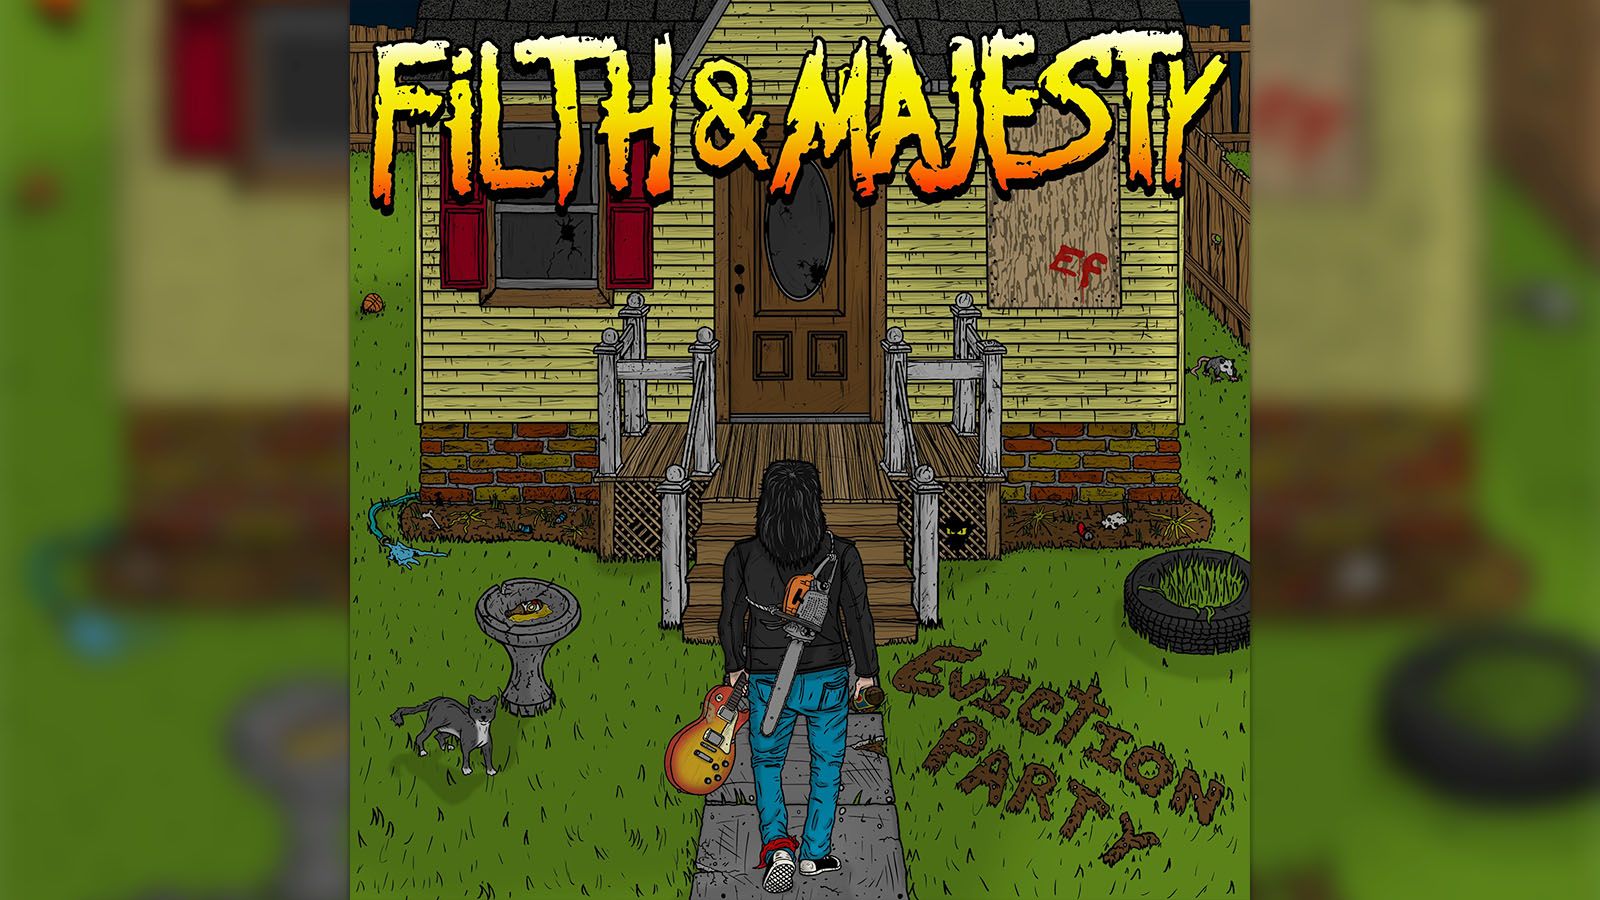 Filth & Majesty have released Eviction Party.